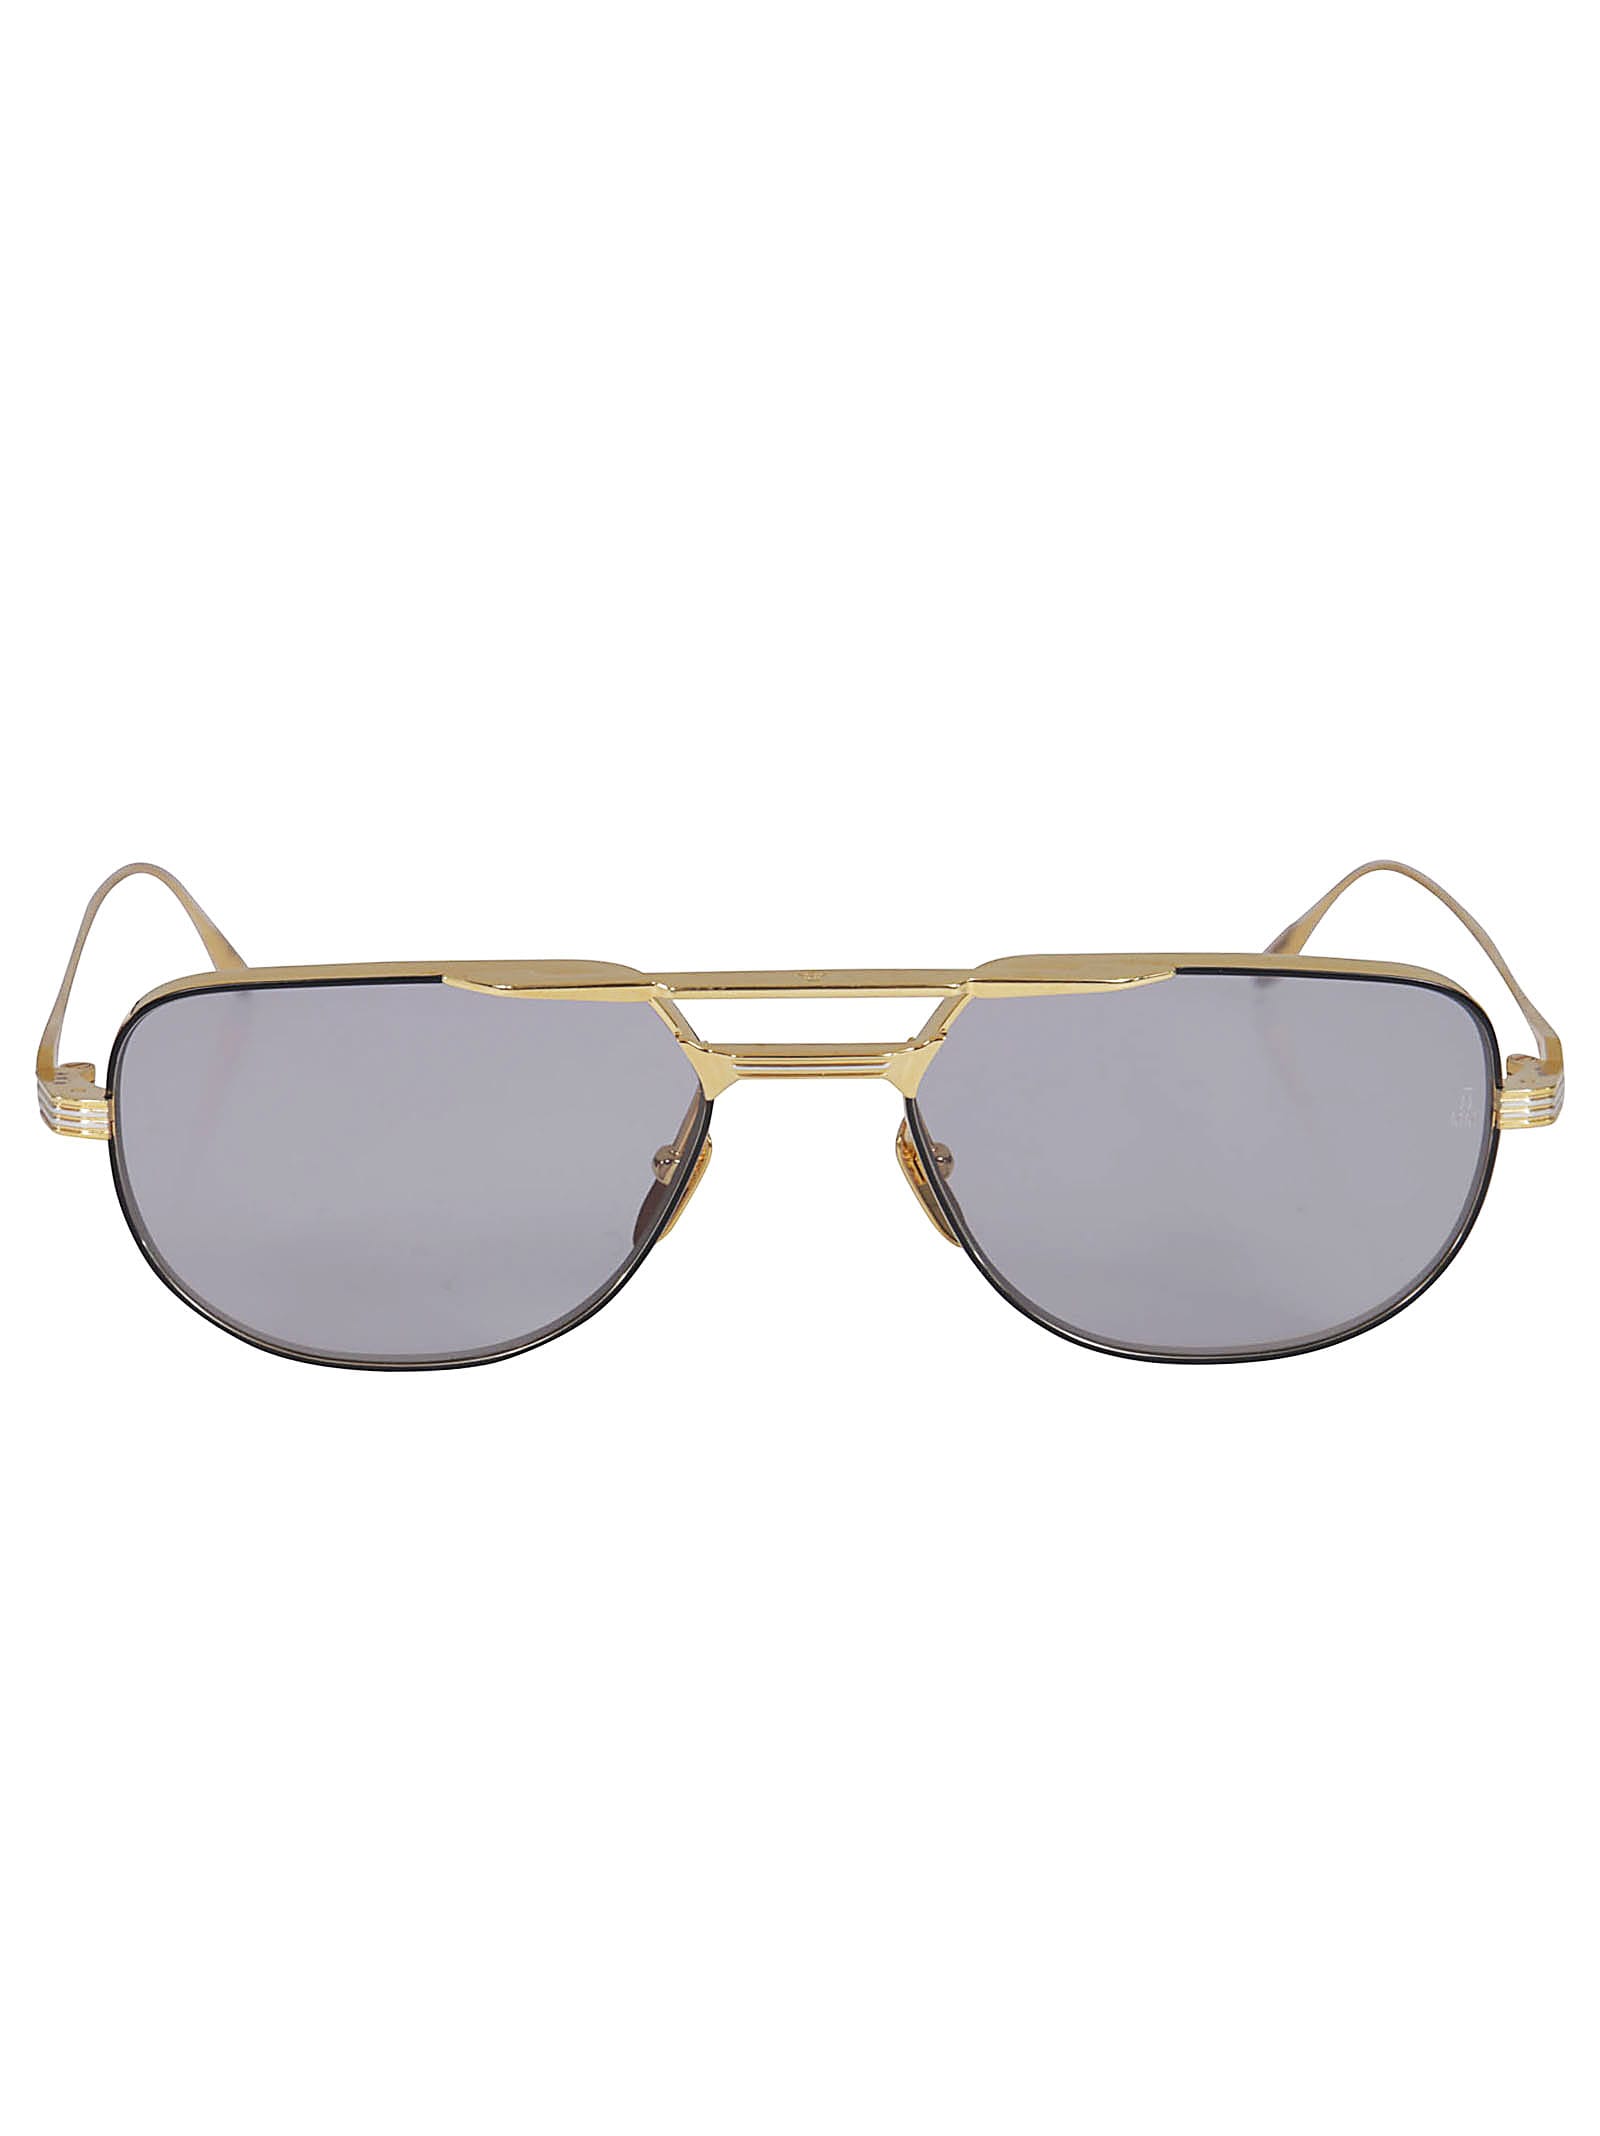 Jacques Marie Mage Roy Sunglasses In Gold | ModeSens